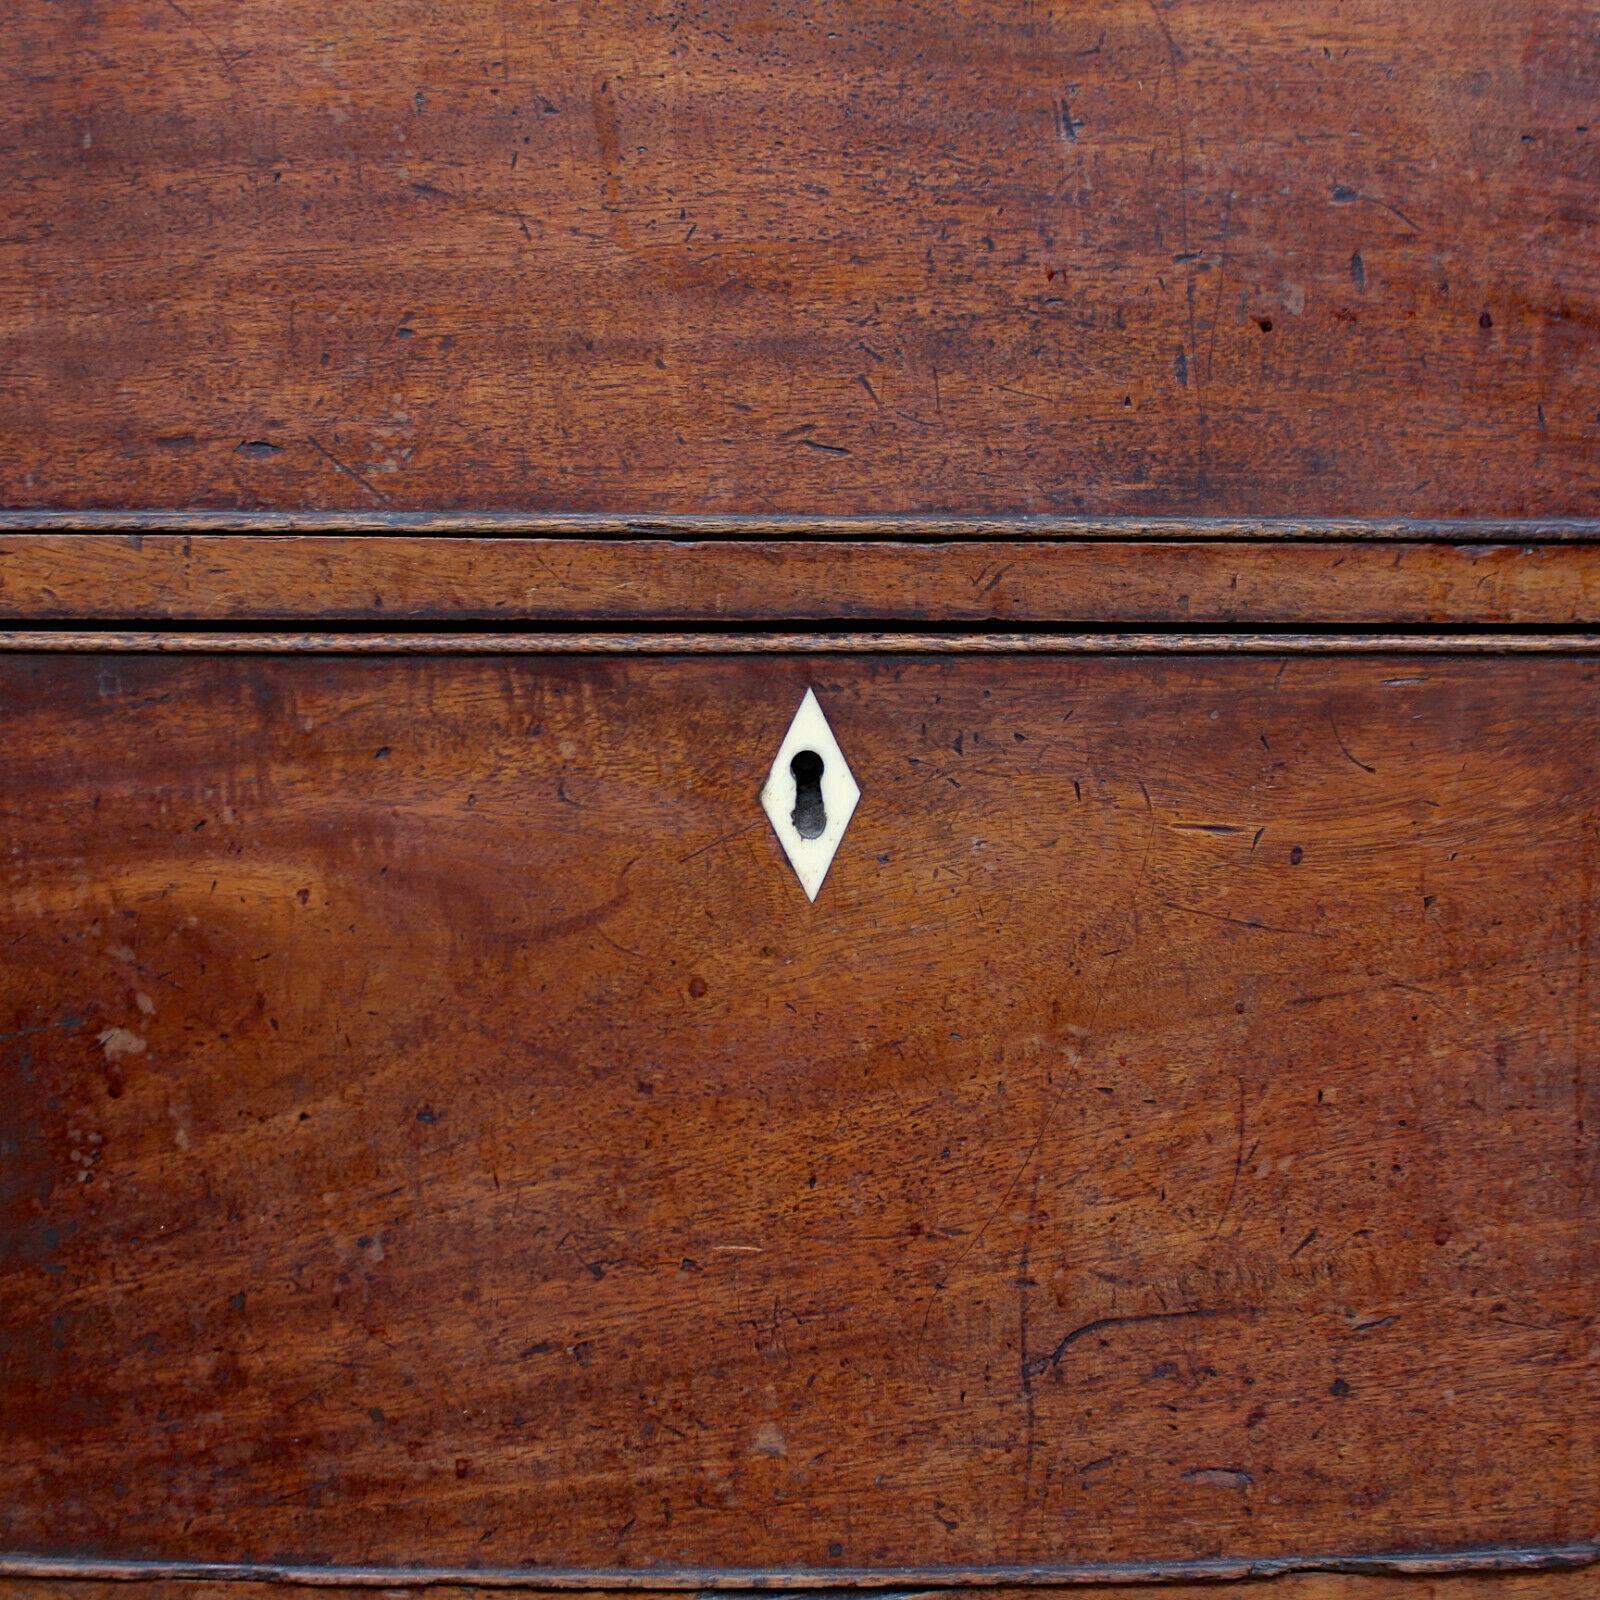 Bowfront Chest of Drawers Carved Inlaid Mahogany, 19th Century For Sale 5